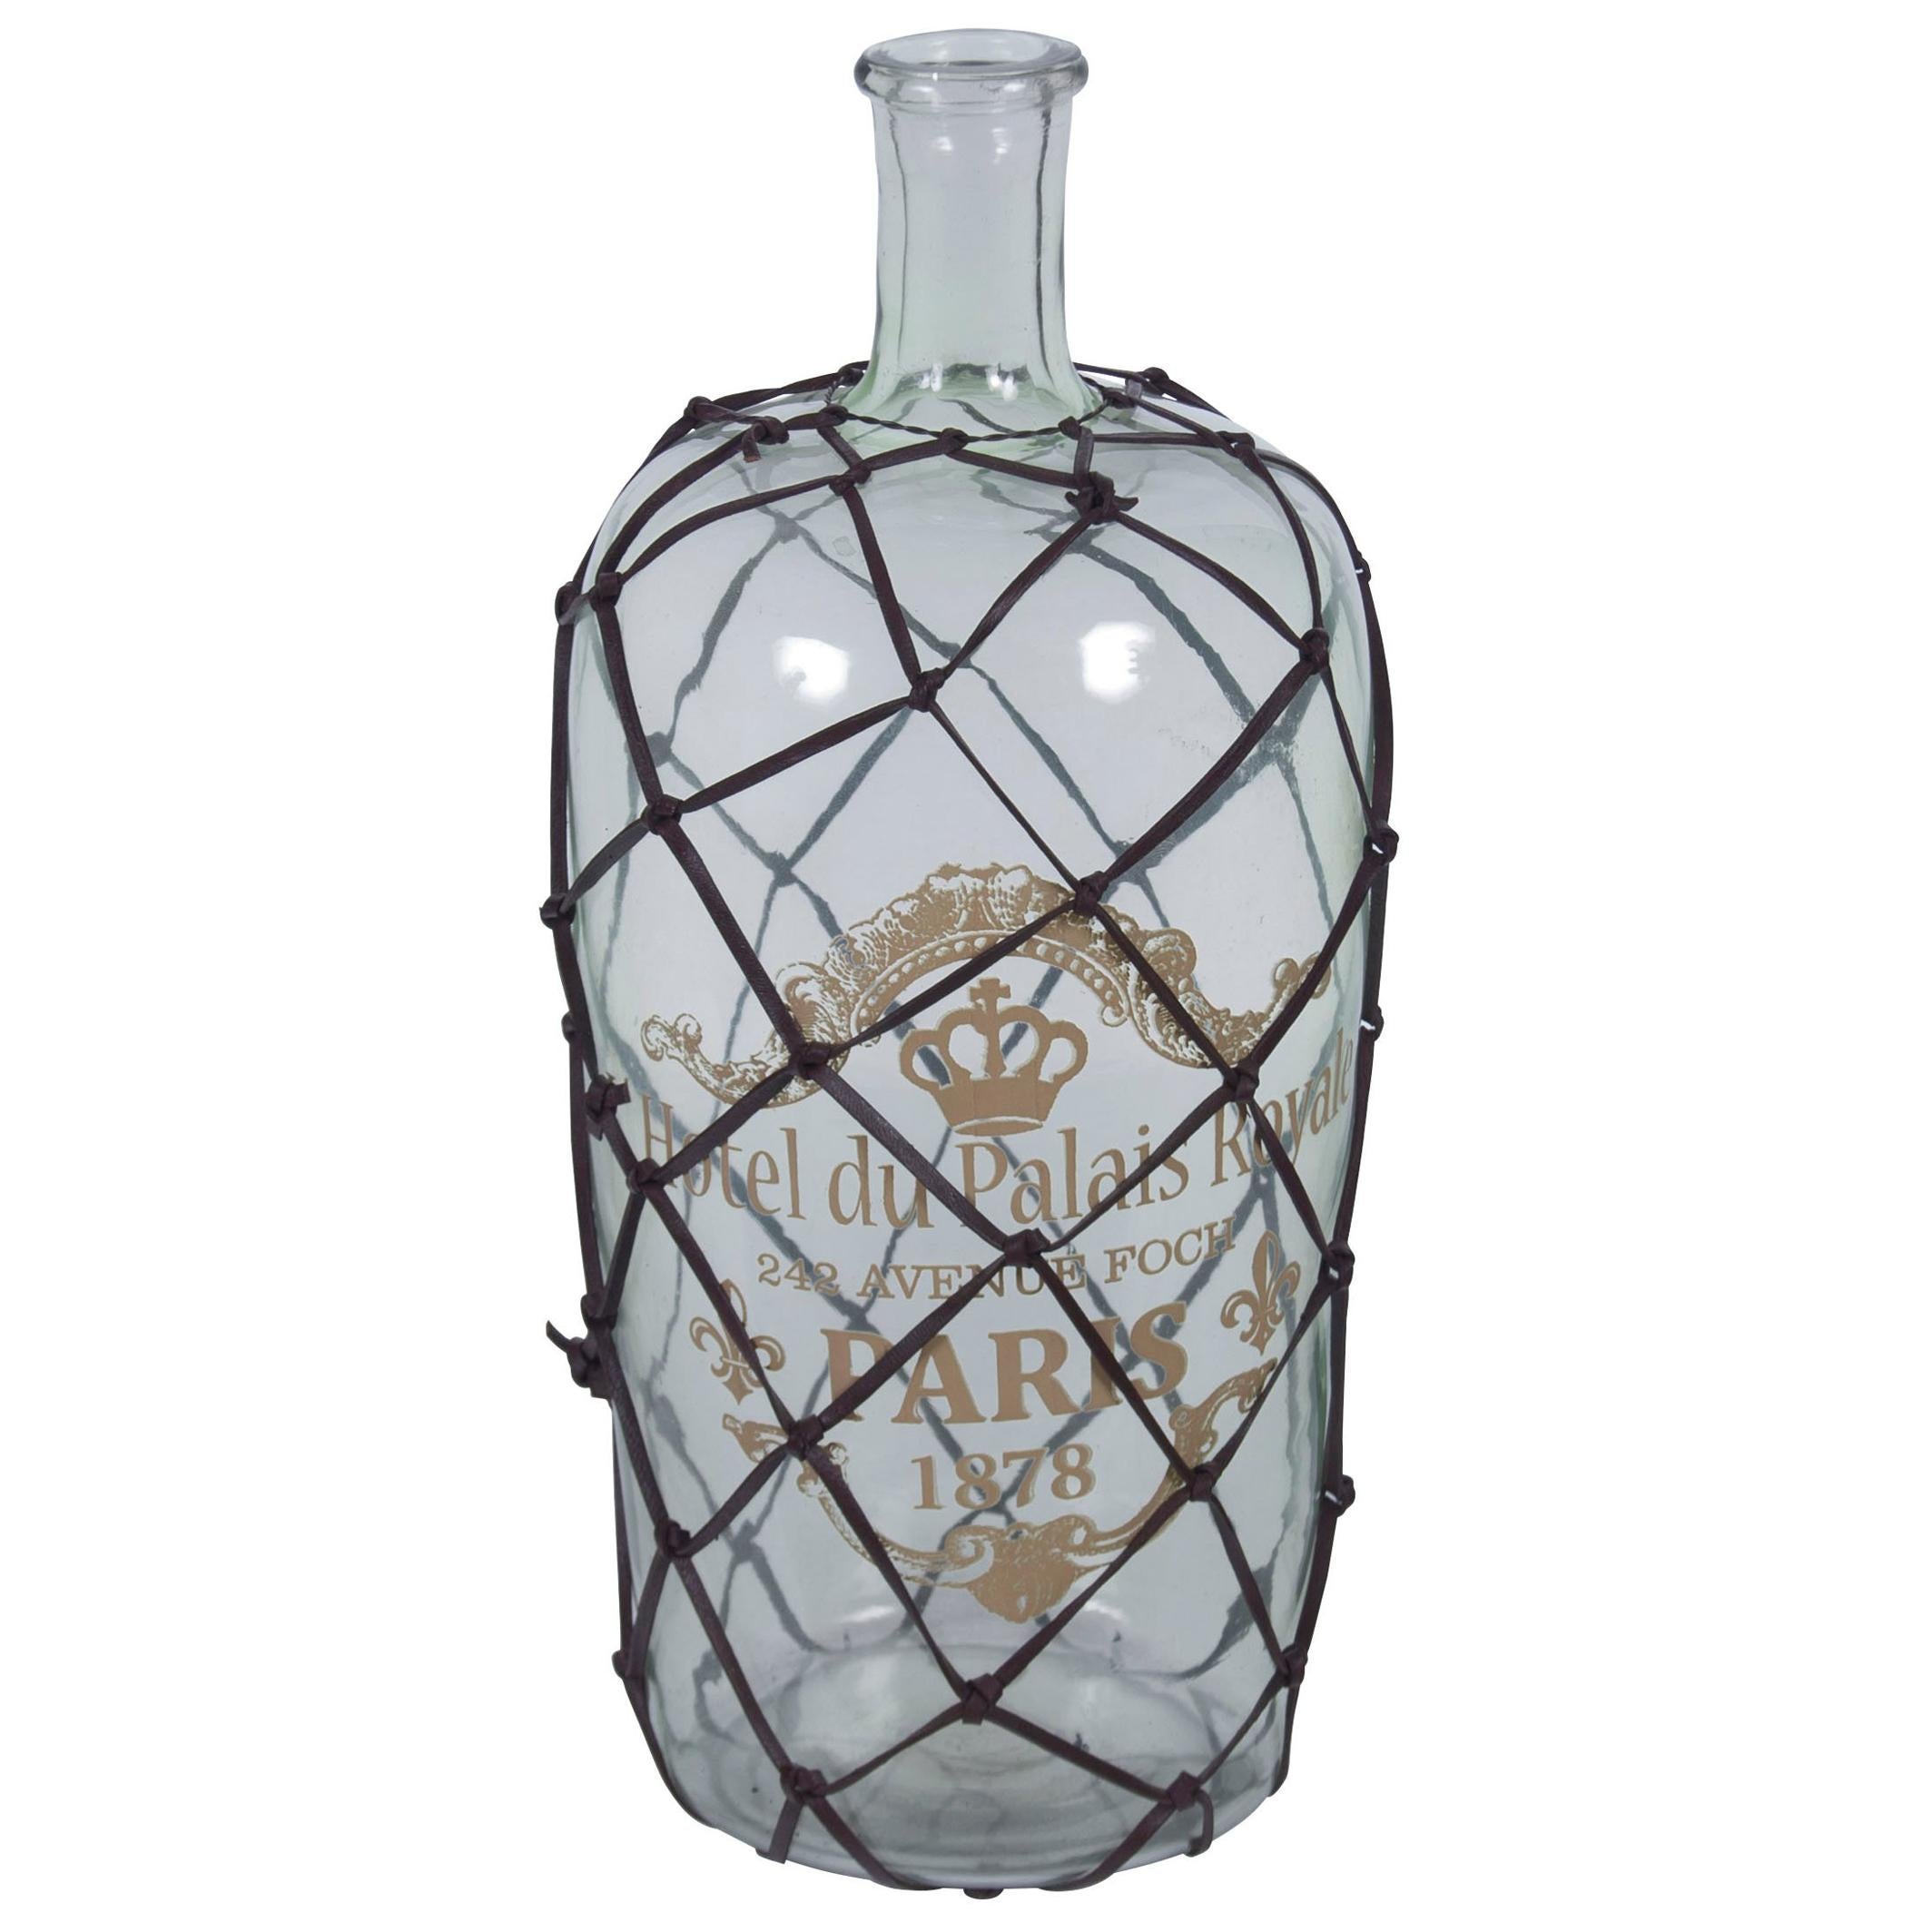 Vintage Style Leather Wrapped Decorative Bottle Wine Jug For Sale